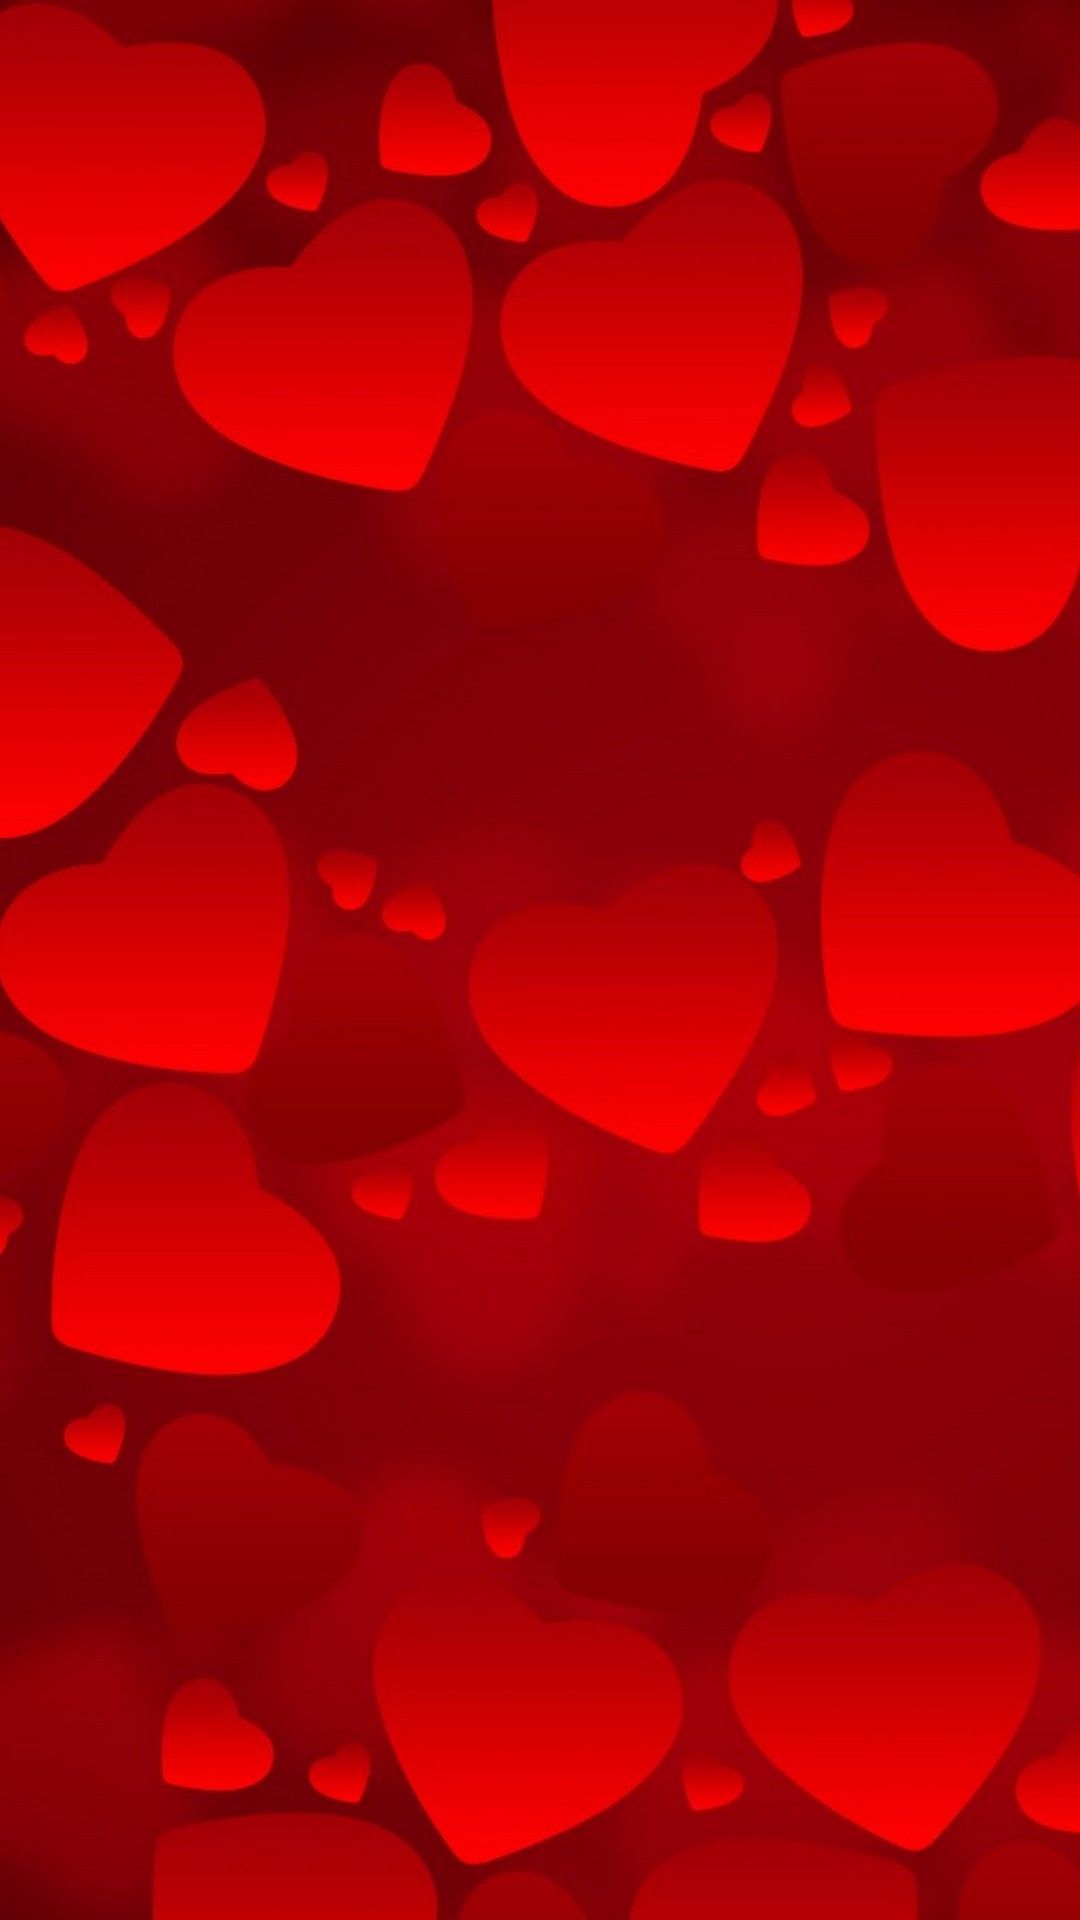 Red heart hd wallpaper for mobile